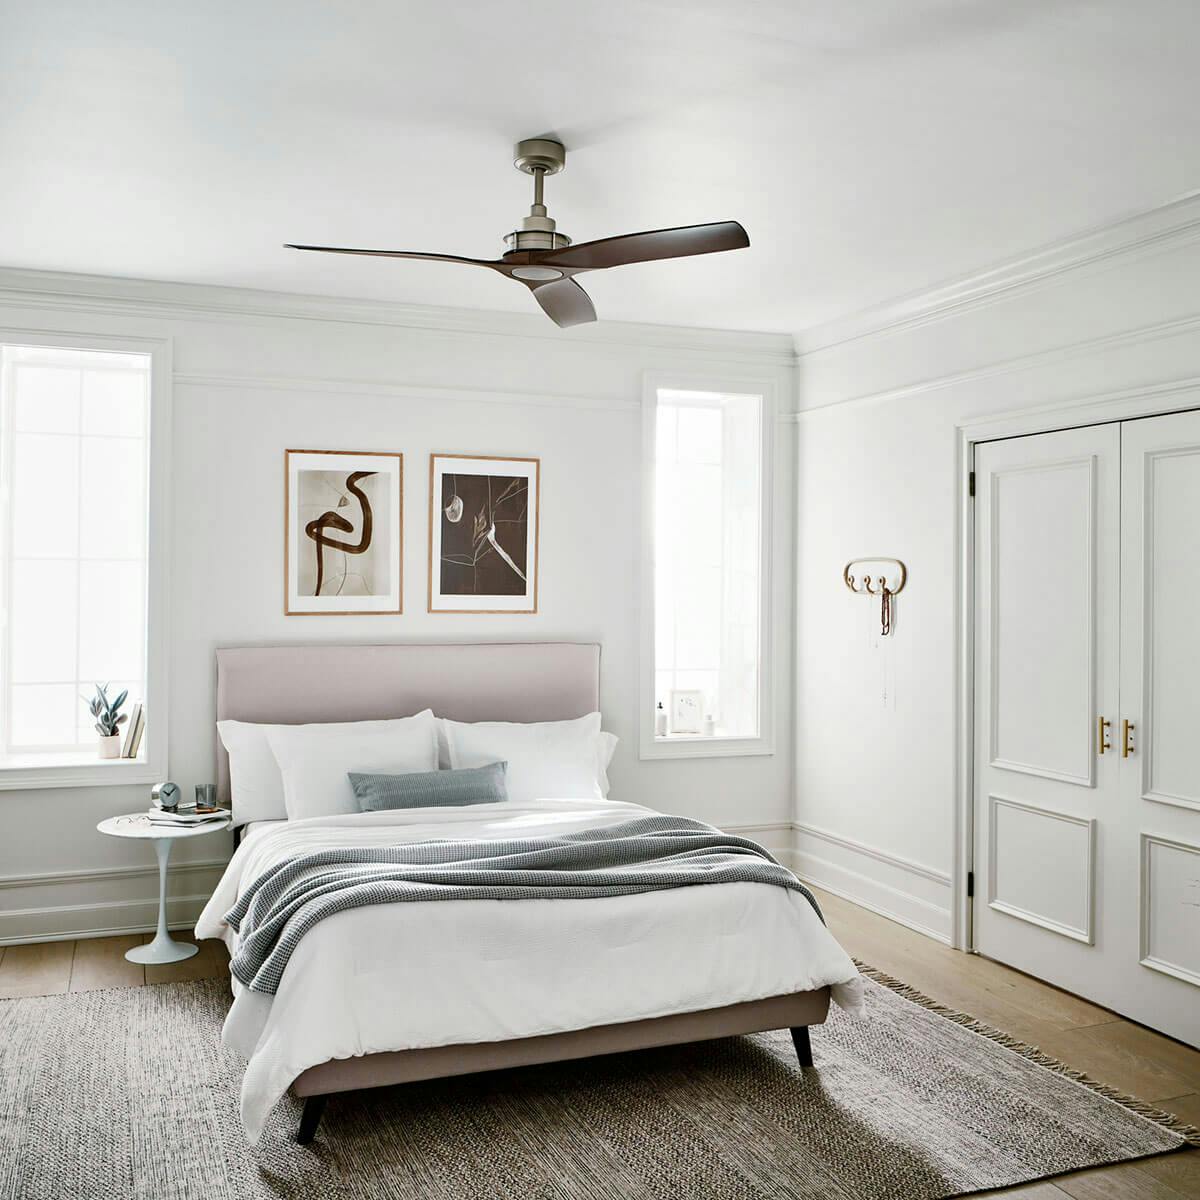 Day timebedroom image featuring Ried 330356NI